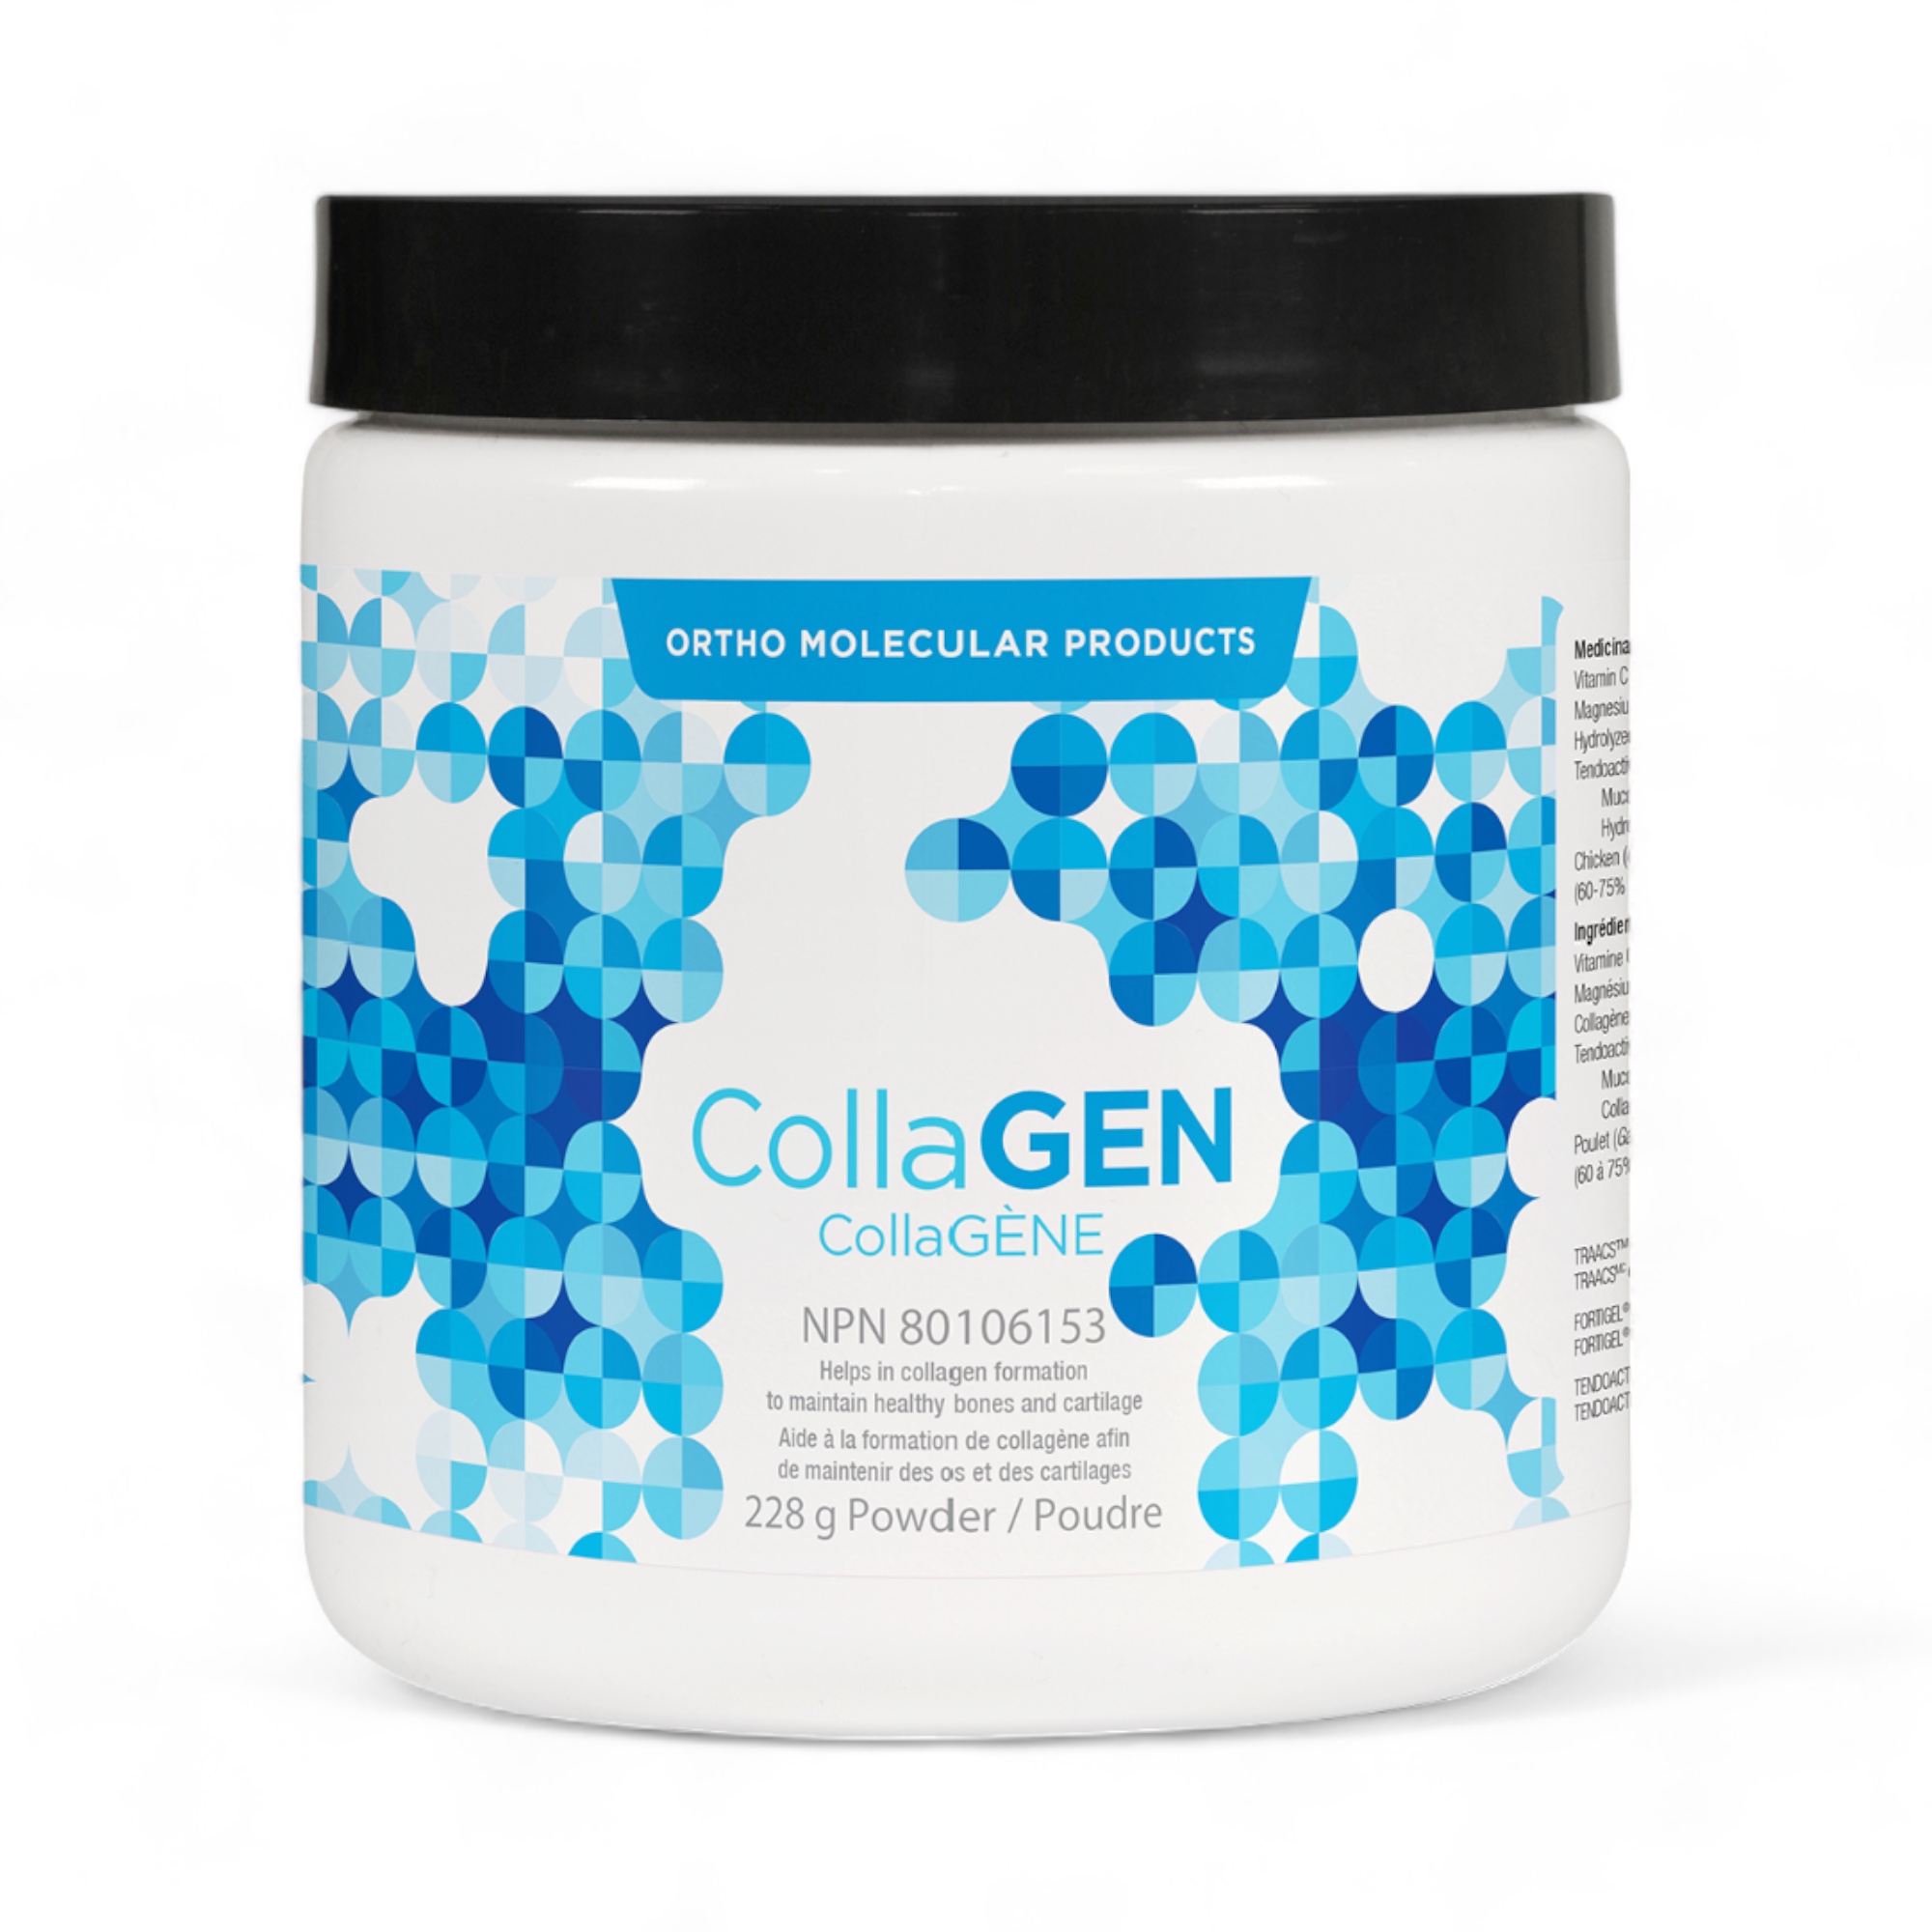 CollaGEN poudre Ortho Molecular Products